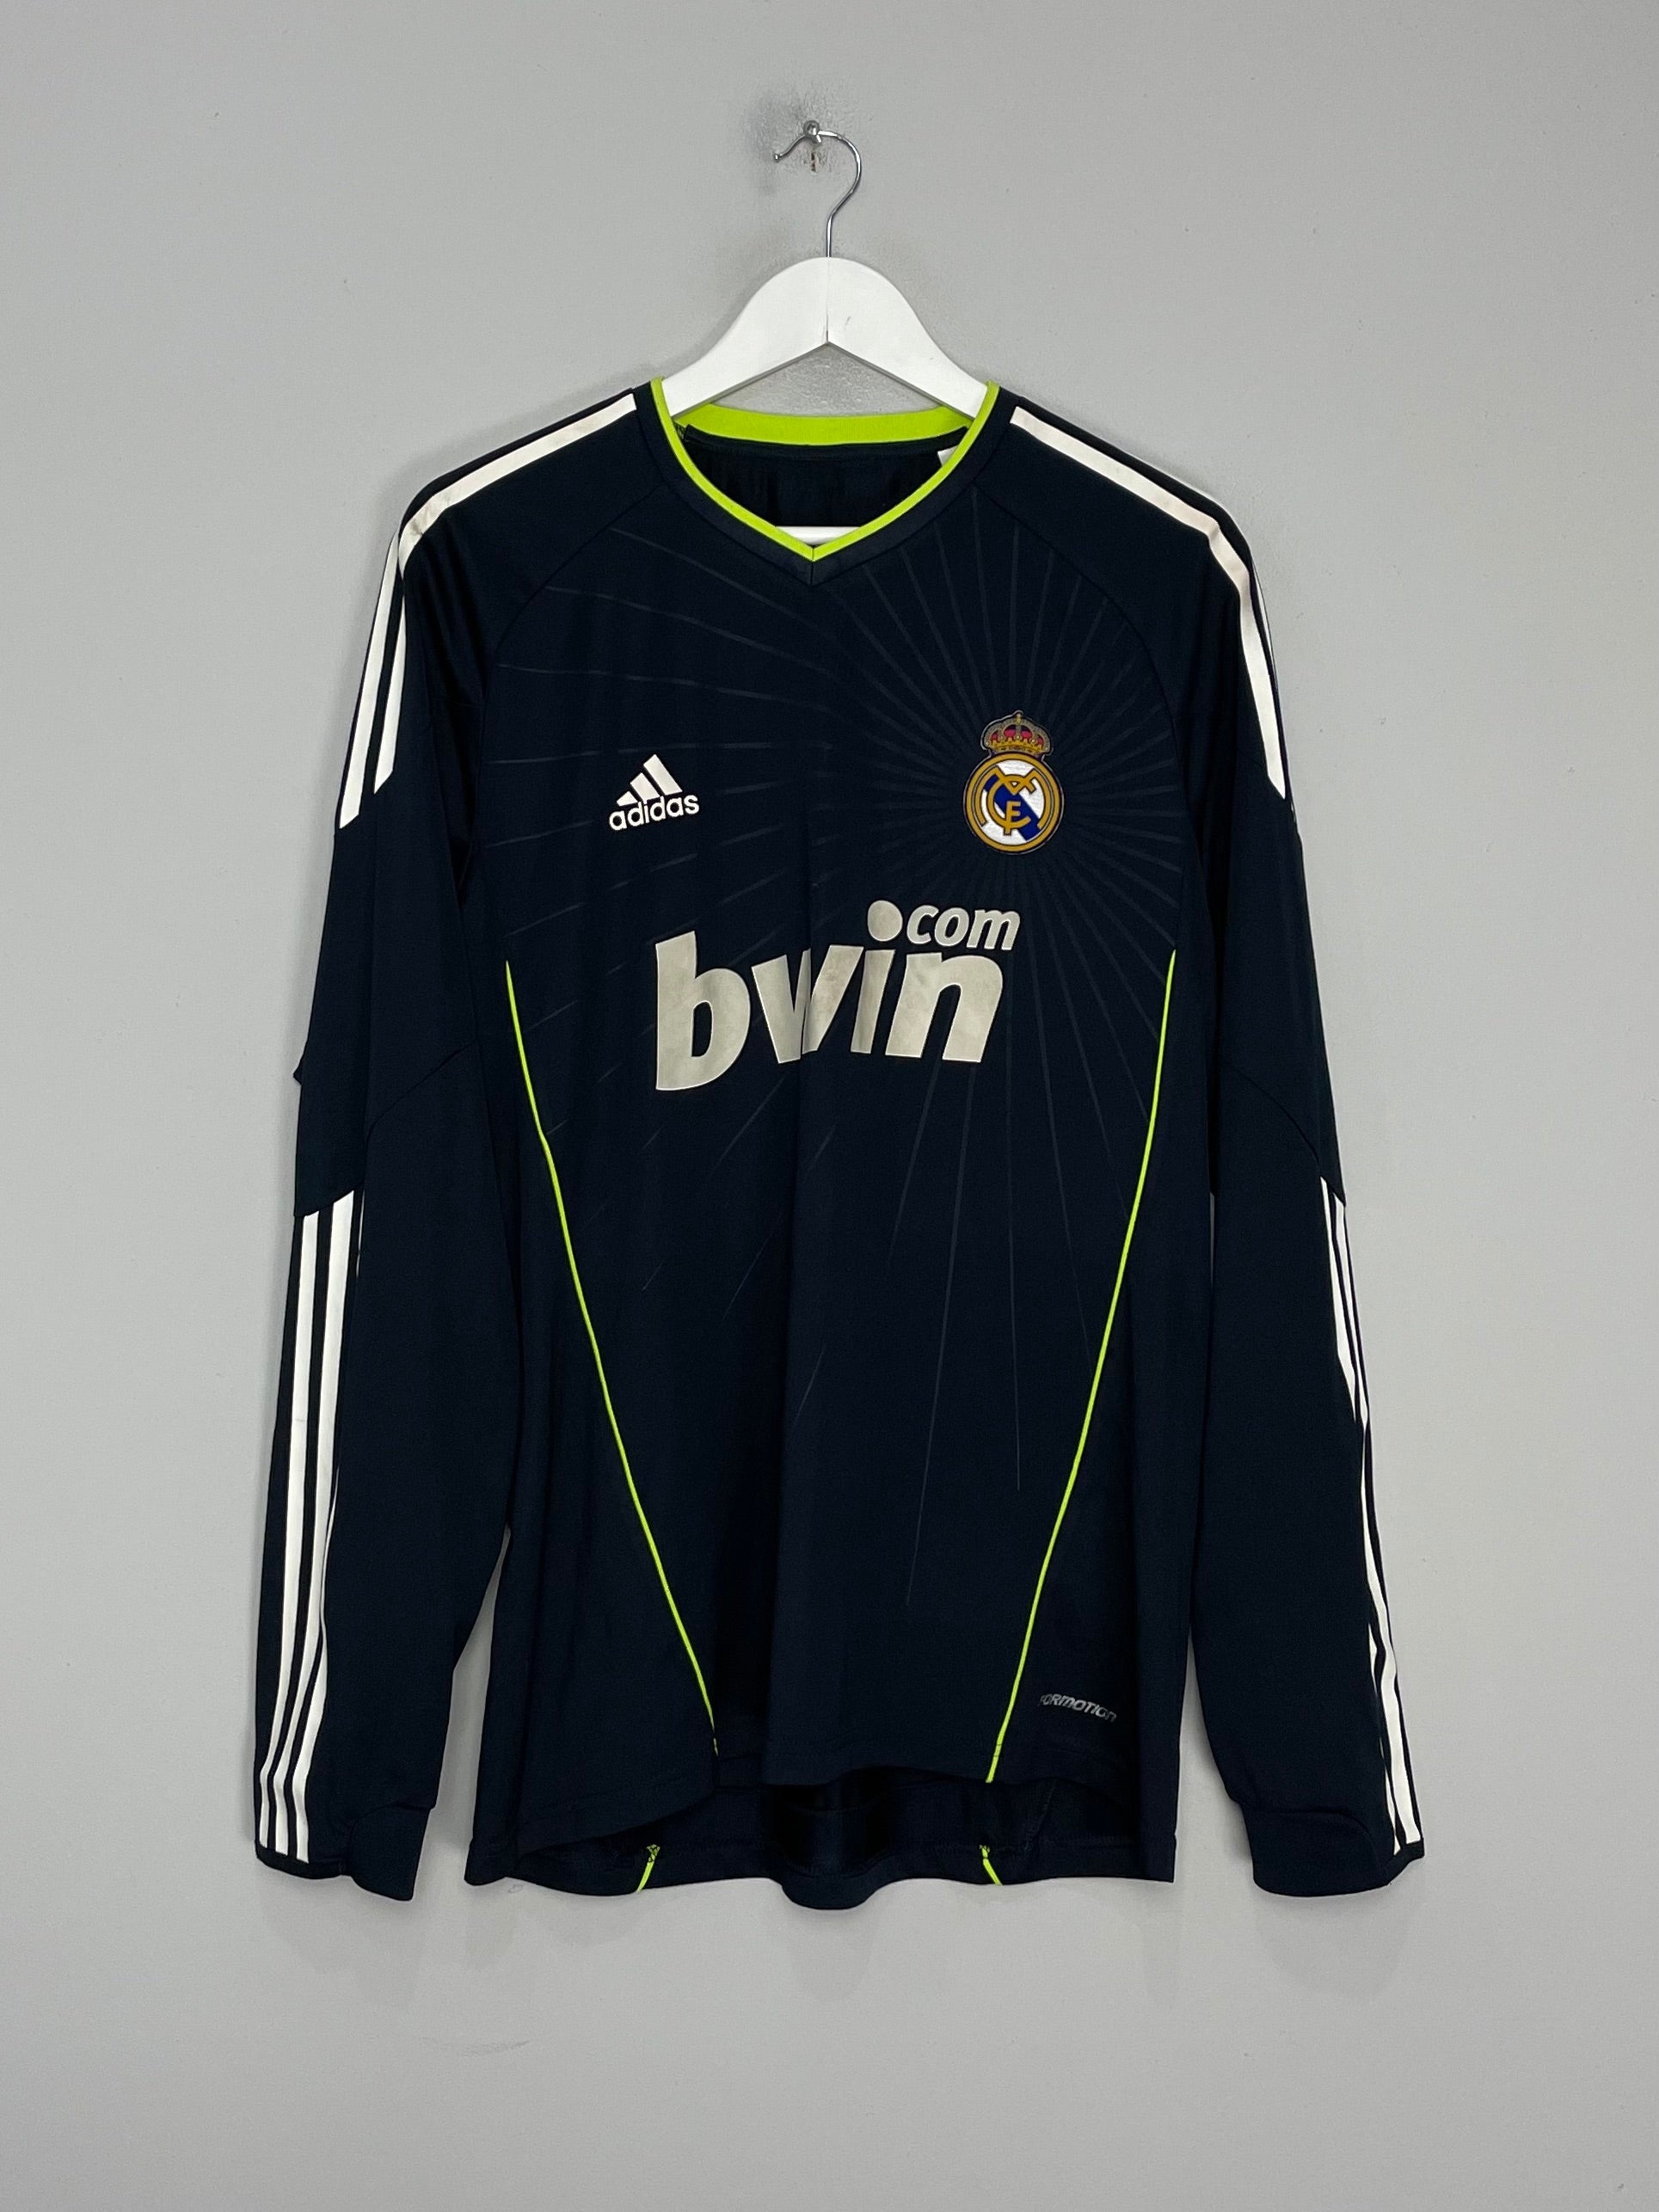 2010/11 REAL MADRID #4 *PLAYER ISSUE* L/S AWAY SHIRT (XL) ADIDAS